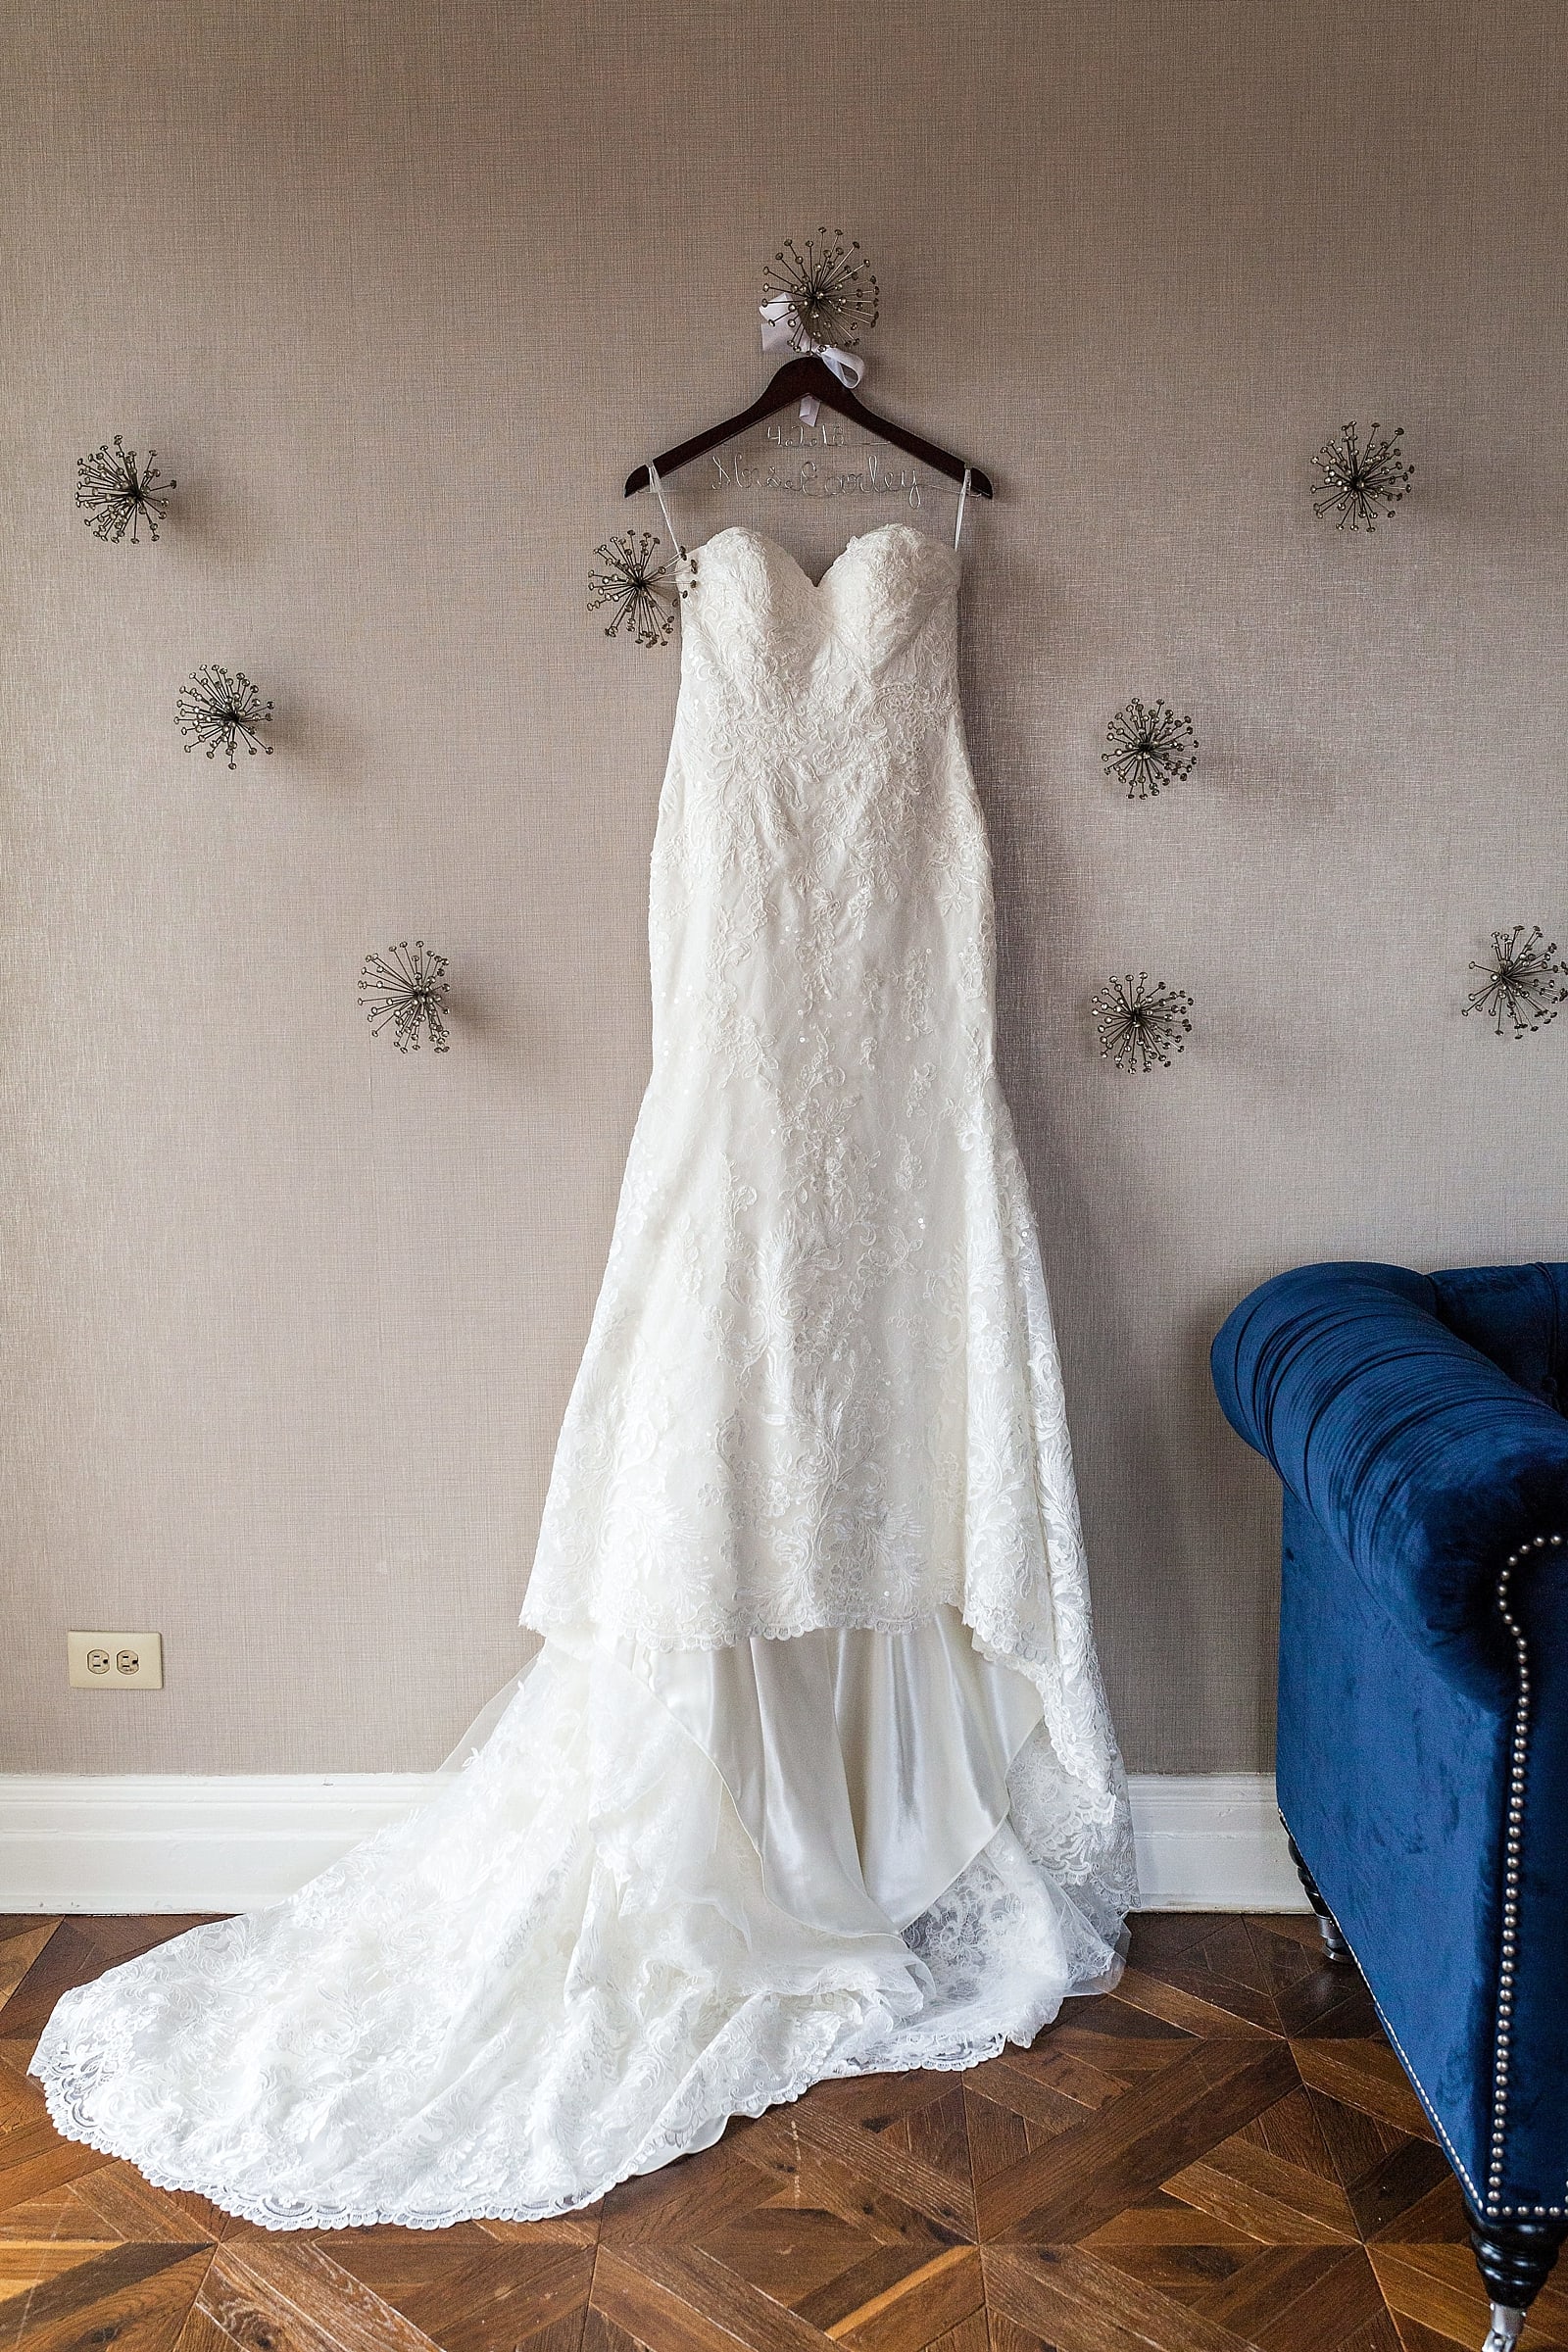 Lace wedding dress hanging on detailed hanger with name and date before wedding